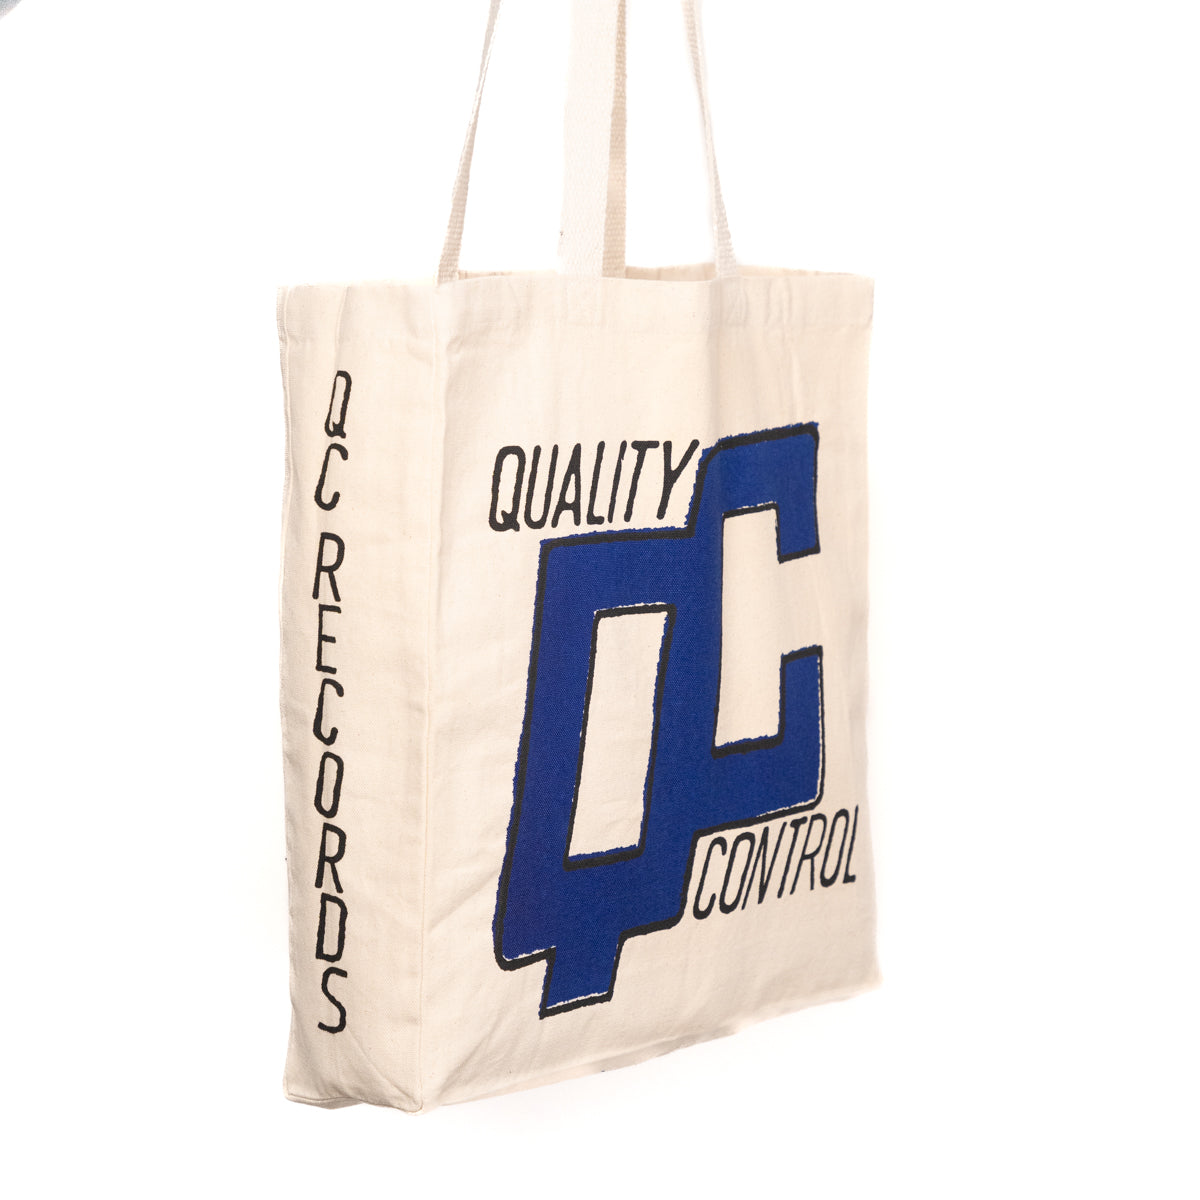 QUALITY CONTROL "LP Sized - Natural" Tote Bag